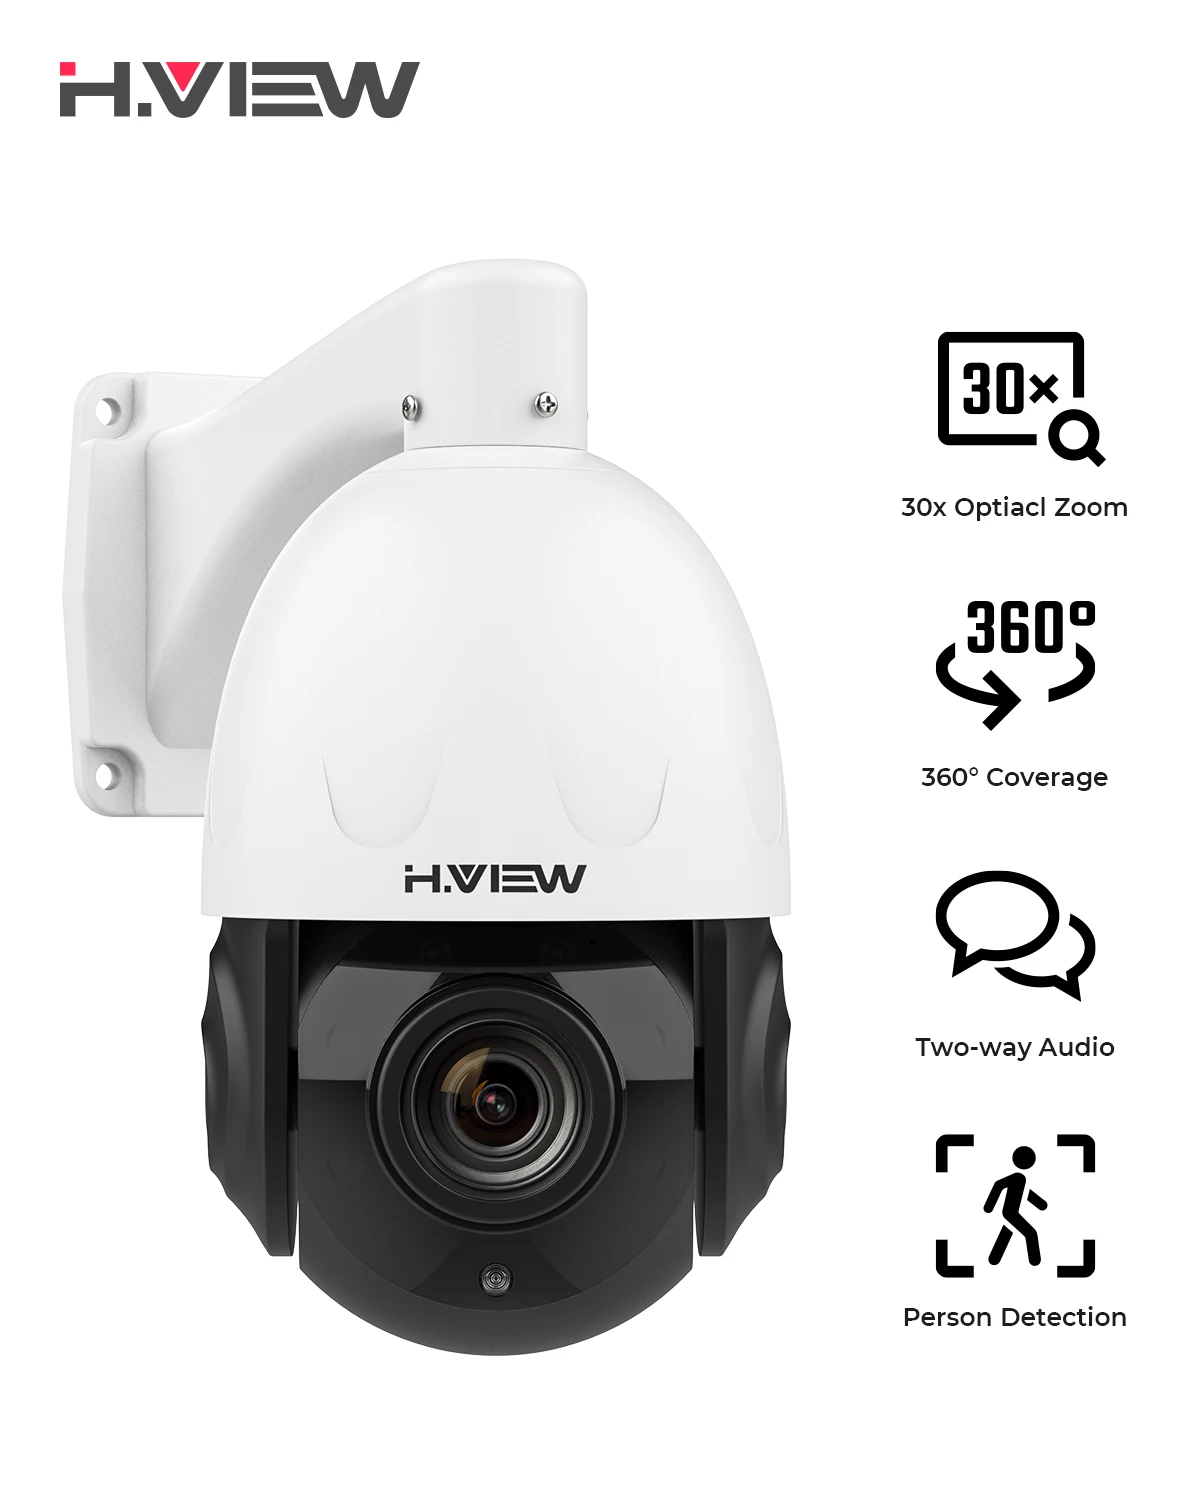 

H.view 5MP 30X PoE PTZ Security Camera, 30X Optical Zoom IP Outdoor Camera, 2-Way Audio,500ft Day/Night Vision, Human Detection